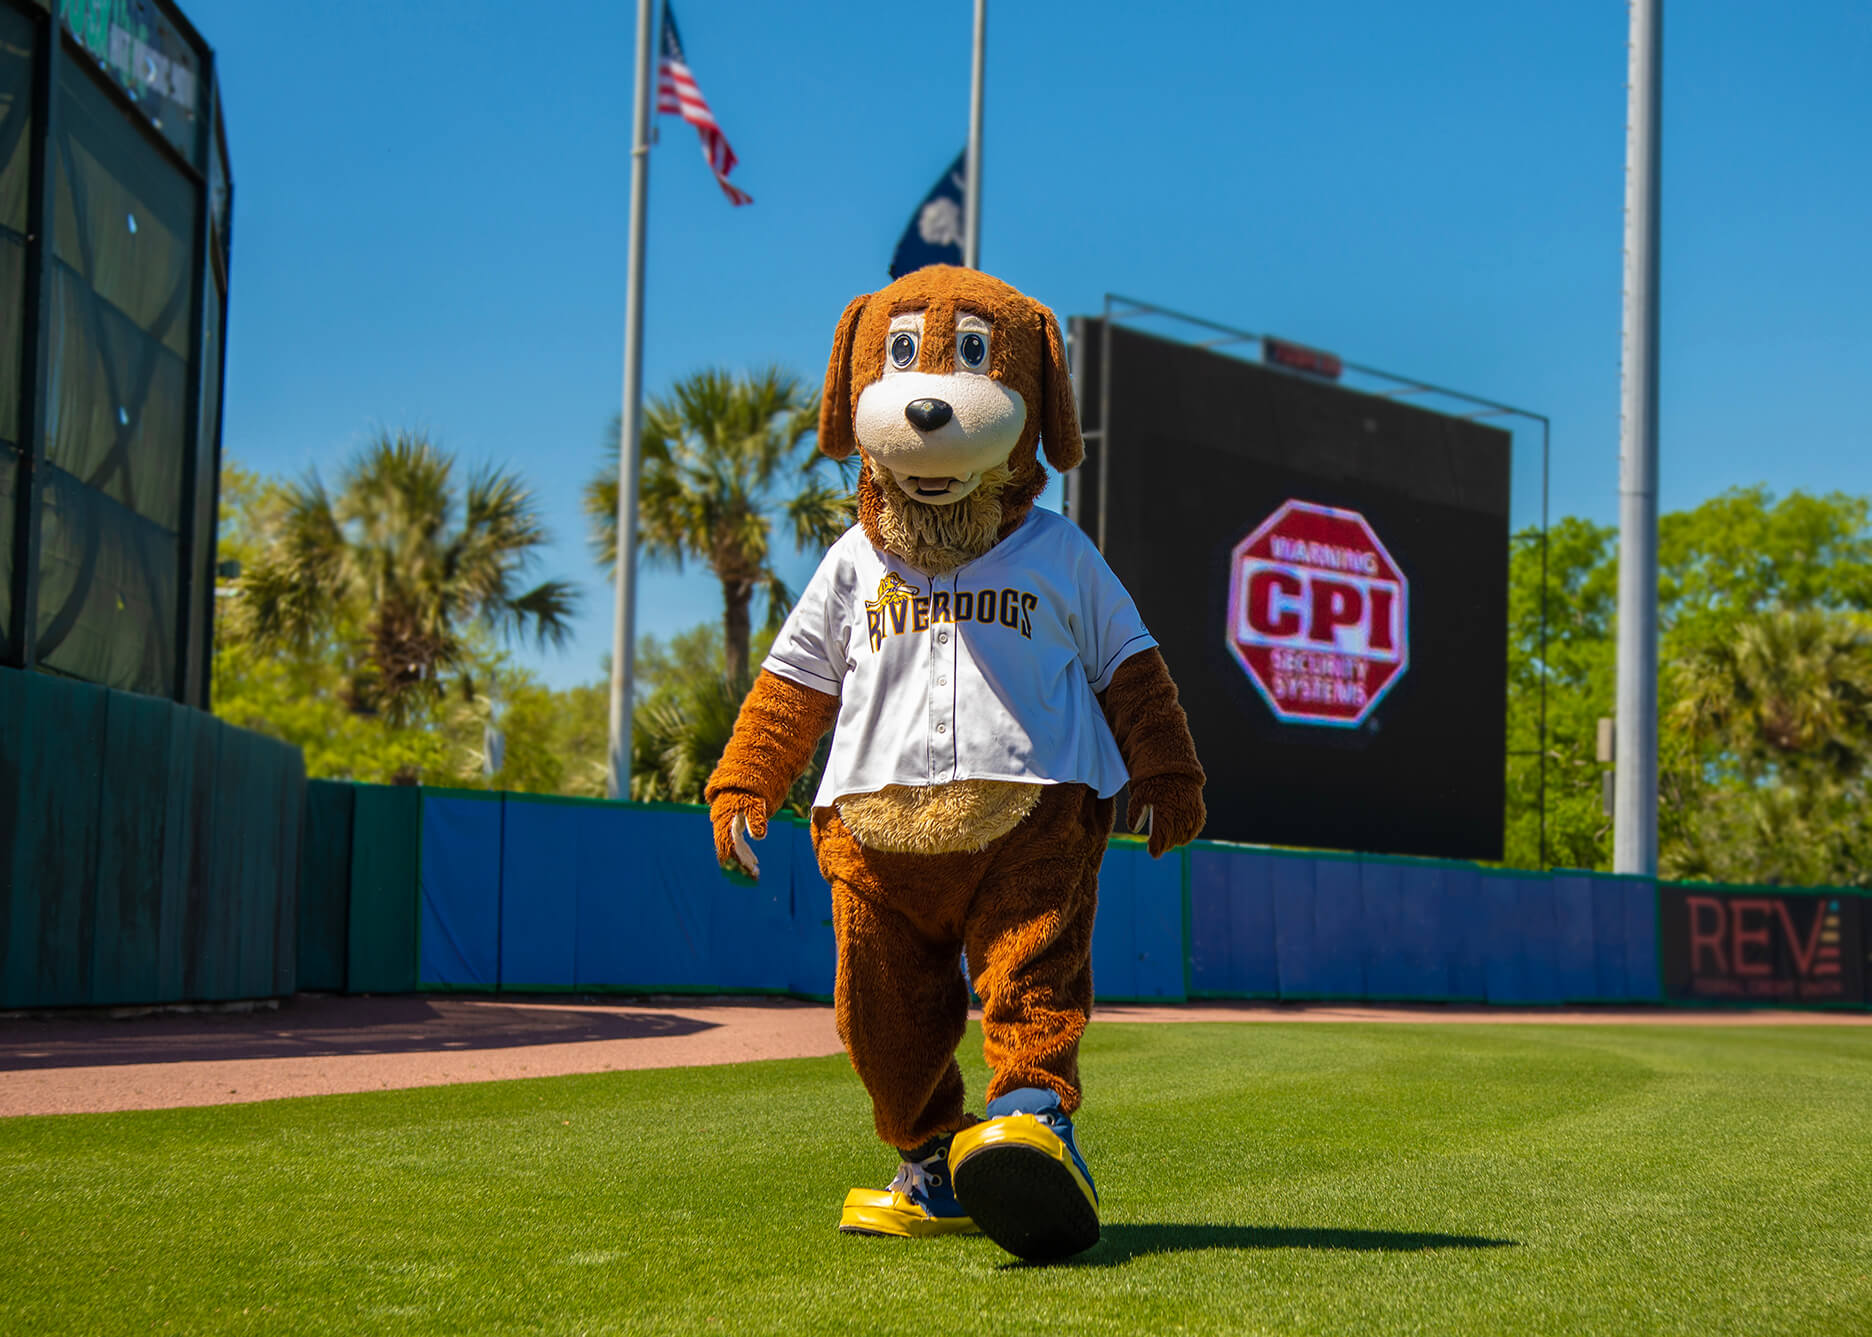 CPI Security and Charleston RiverDogs